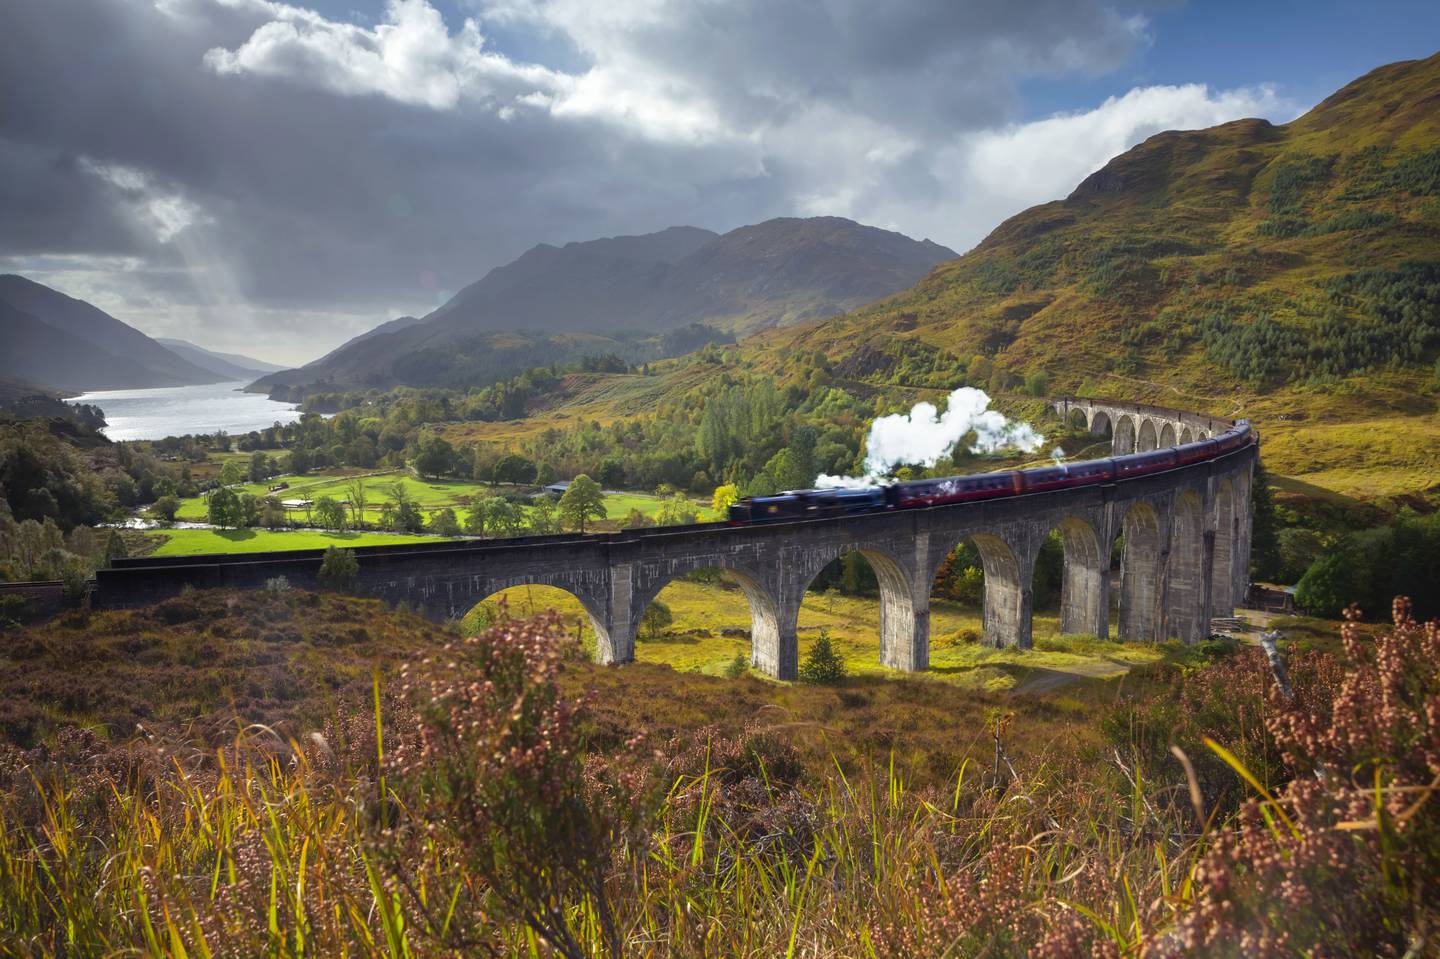 UK, Scotland, Highland, Loch Shiel, Glenfinnan, Glenfinnan Railway Viaduct, part of the West Highland Line, The Jacobite Steam Train, made famous in JK Rowling's Harry Potter as the Hogwarts Express. Getty Images